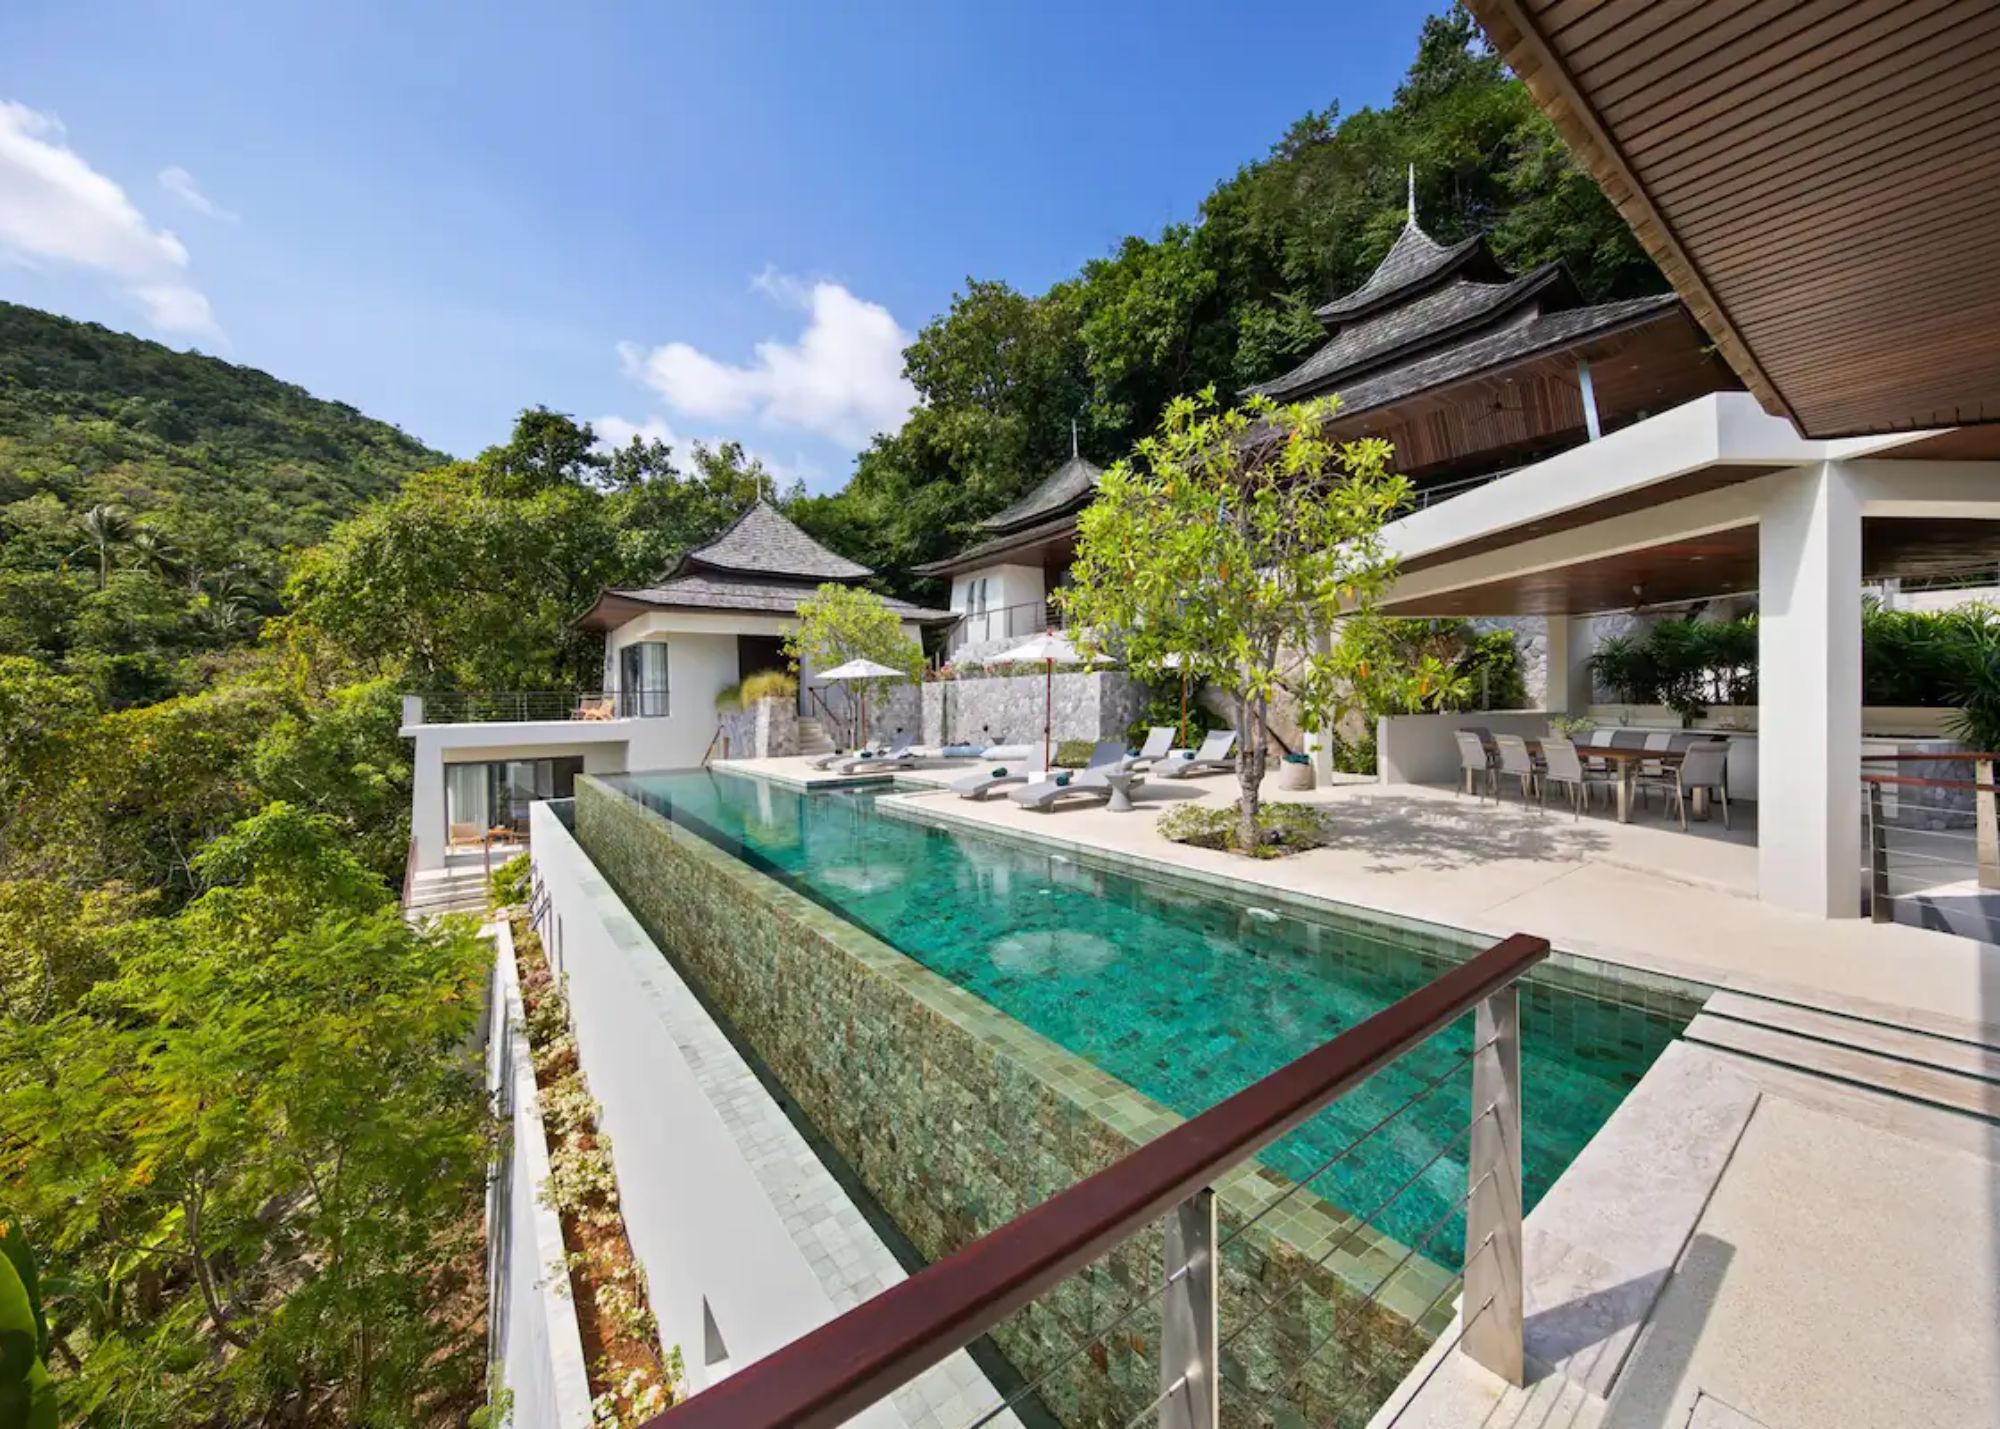 Lap pool with expansive terrace, waterfall, and covered open-air day kitchen